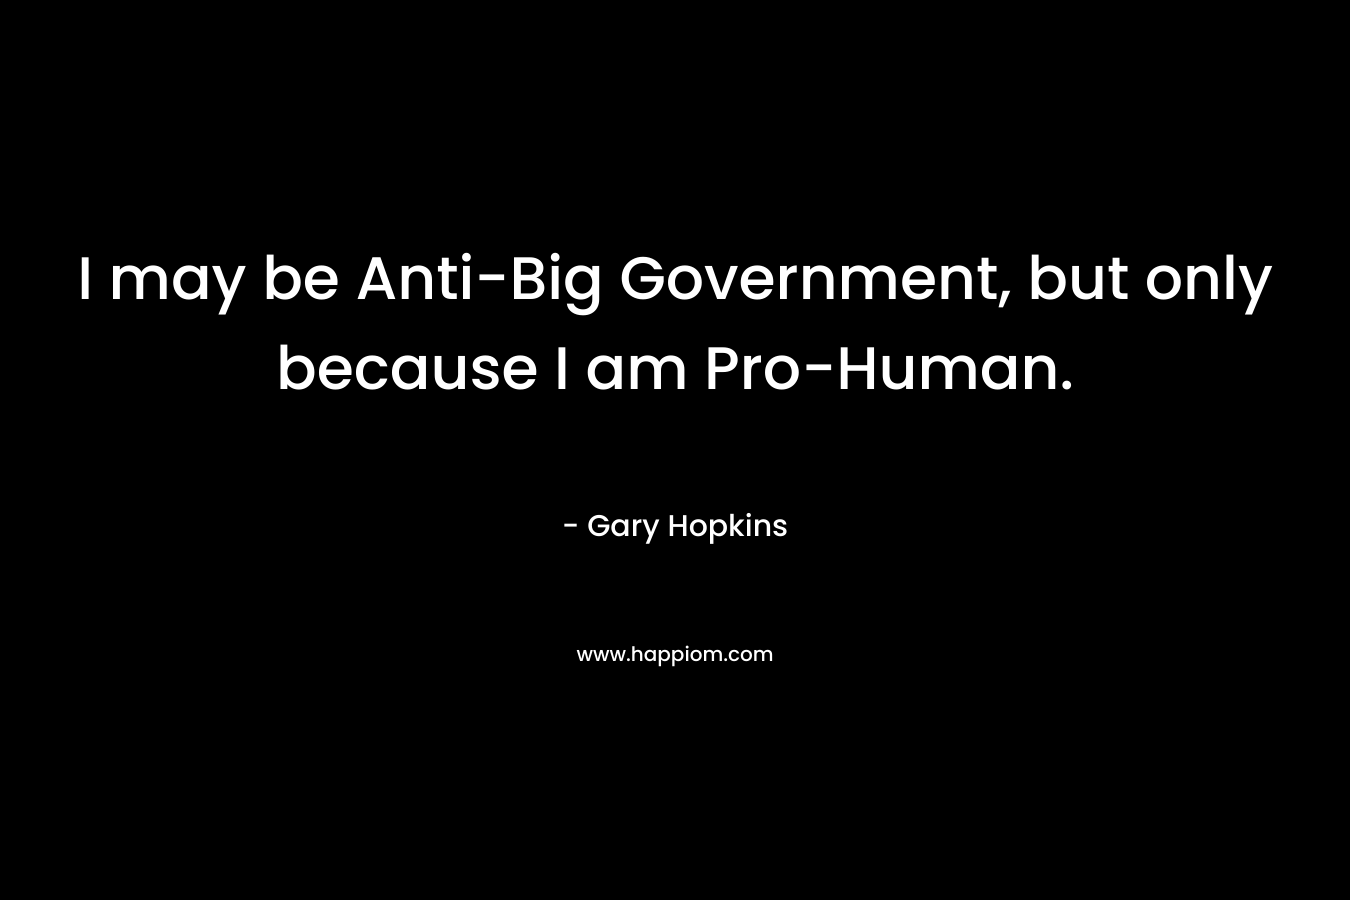 I may be Anti-Big Government, but only because I am Pro-Human.